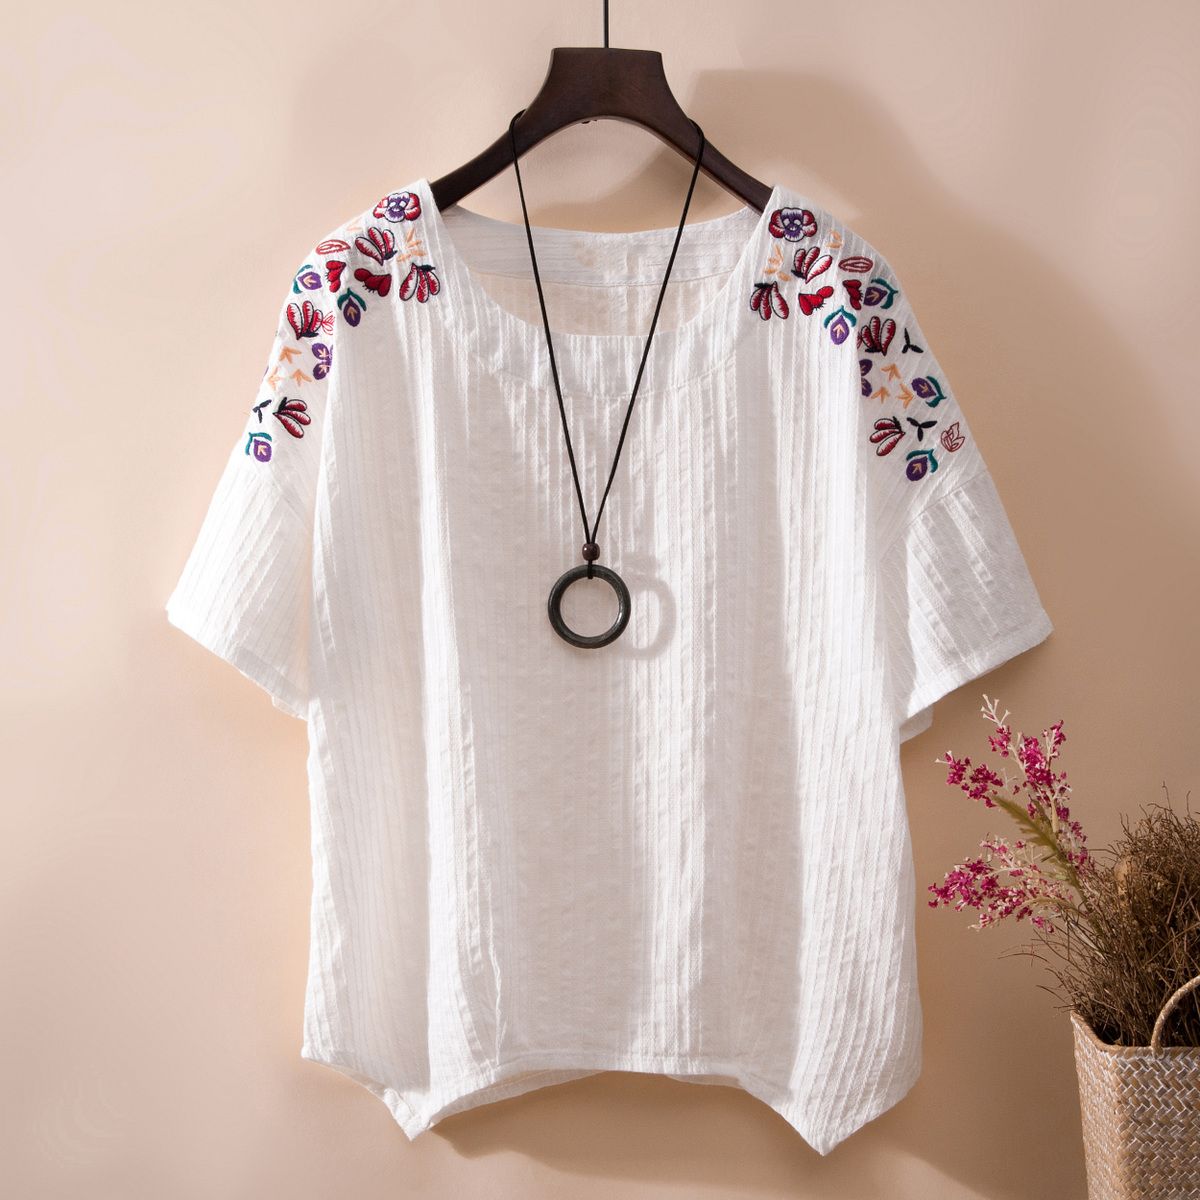 2019 summer new ethnic style cotton embroidery short-sleeved t-shirt retro loose embroidery large size bottoming shirt women's clothing